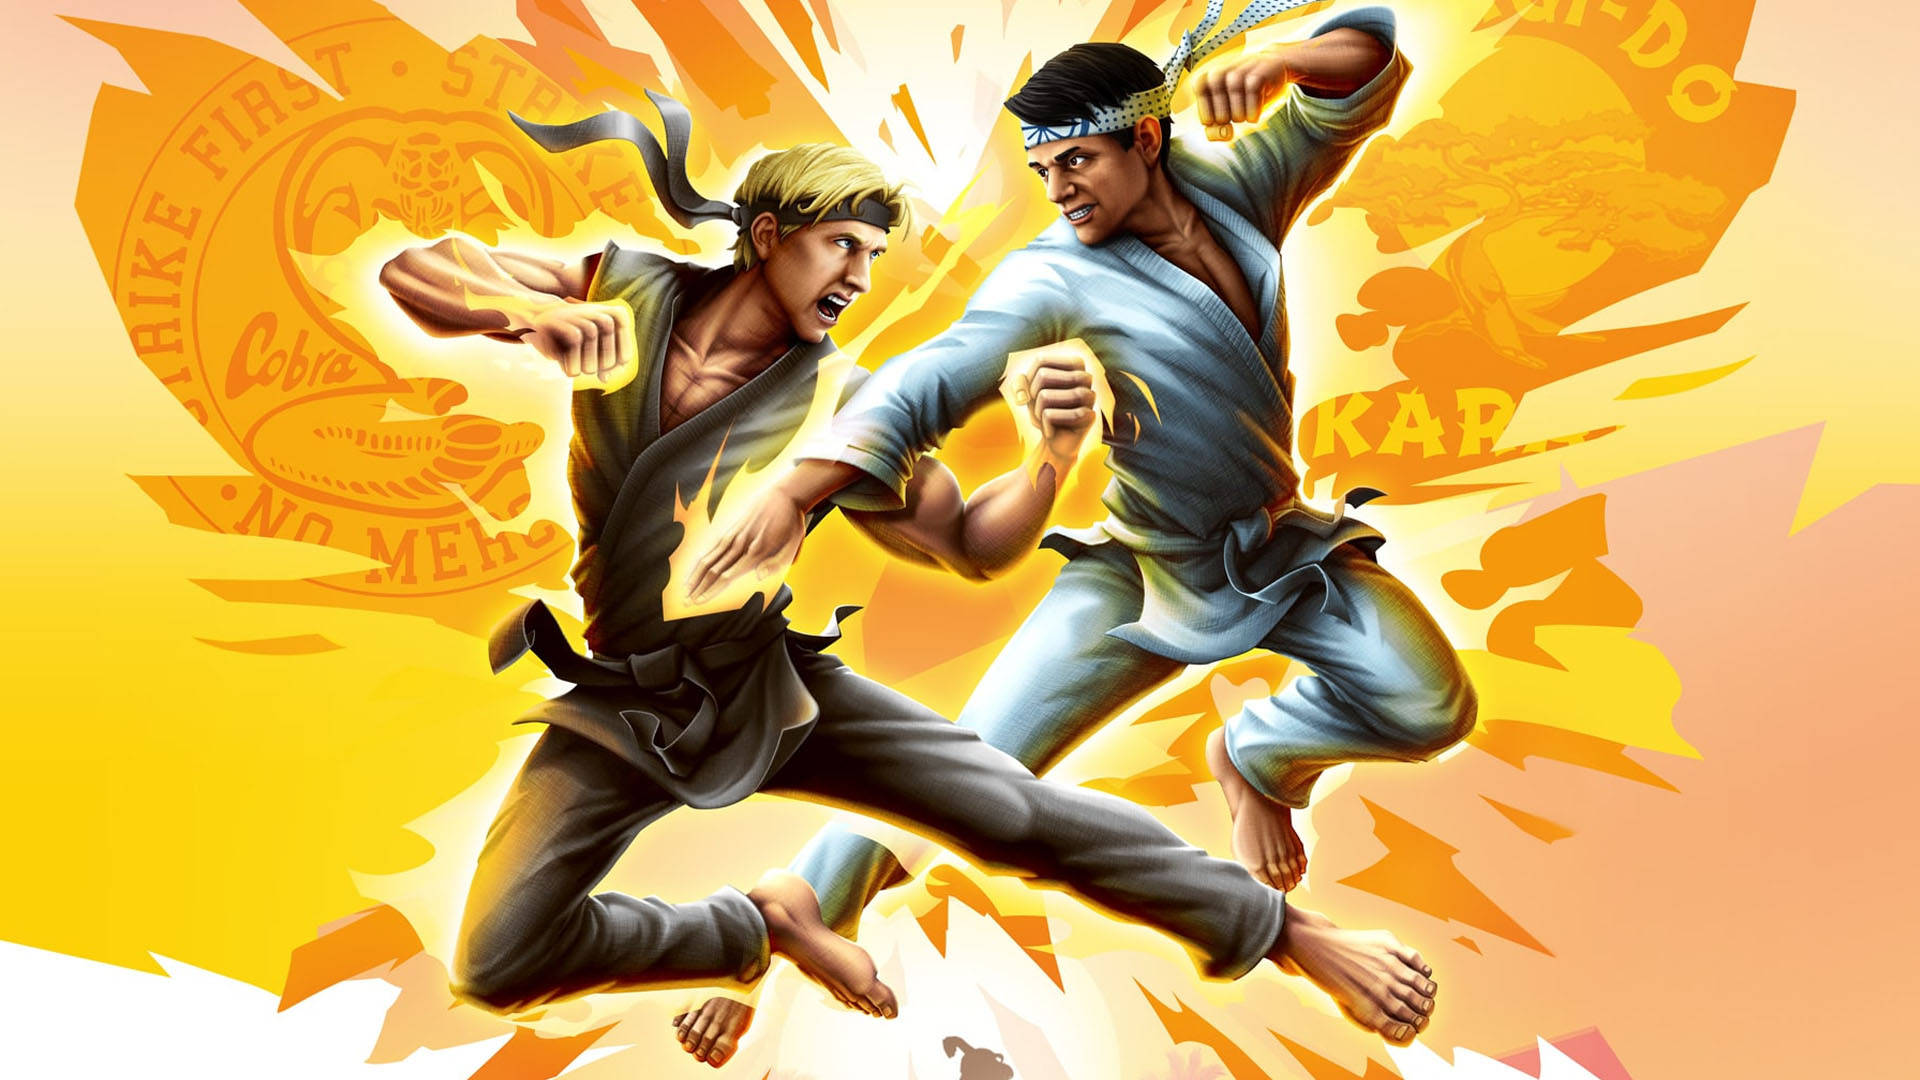 Two Karate Fighters Engaged In A High-stakes Battle Background